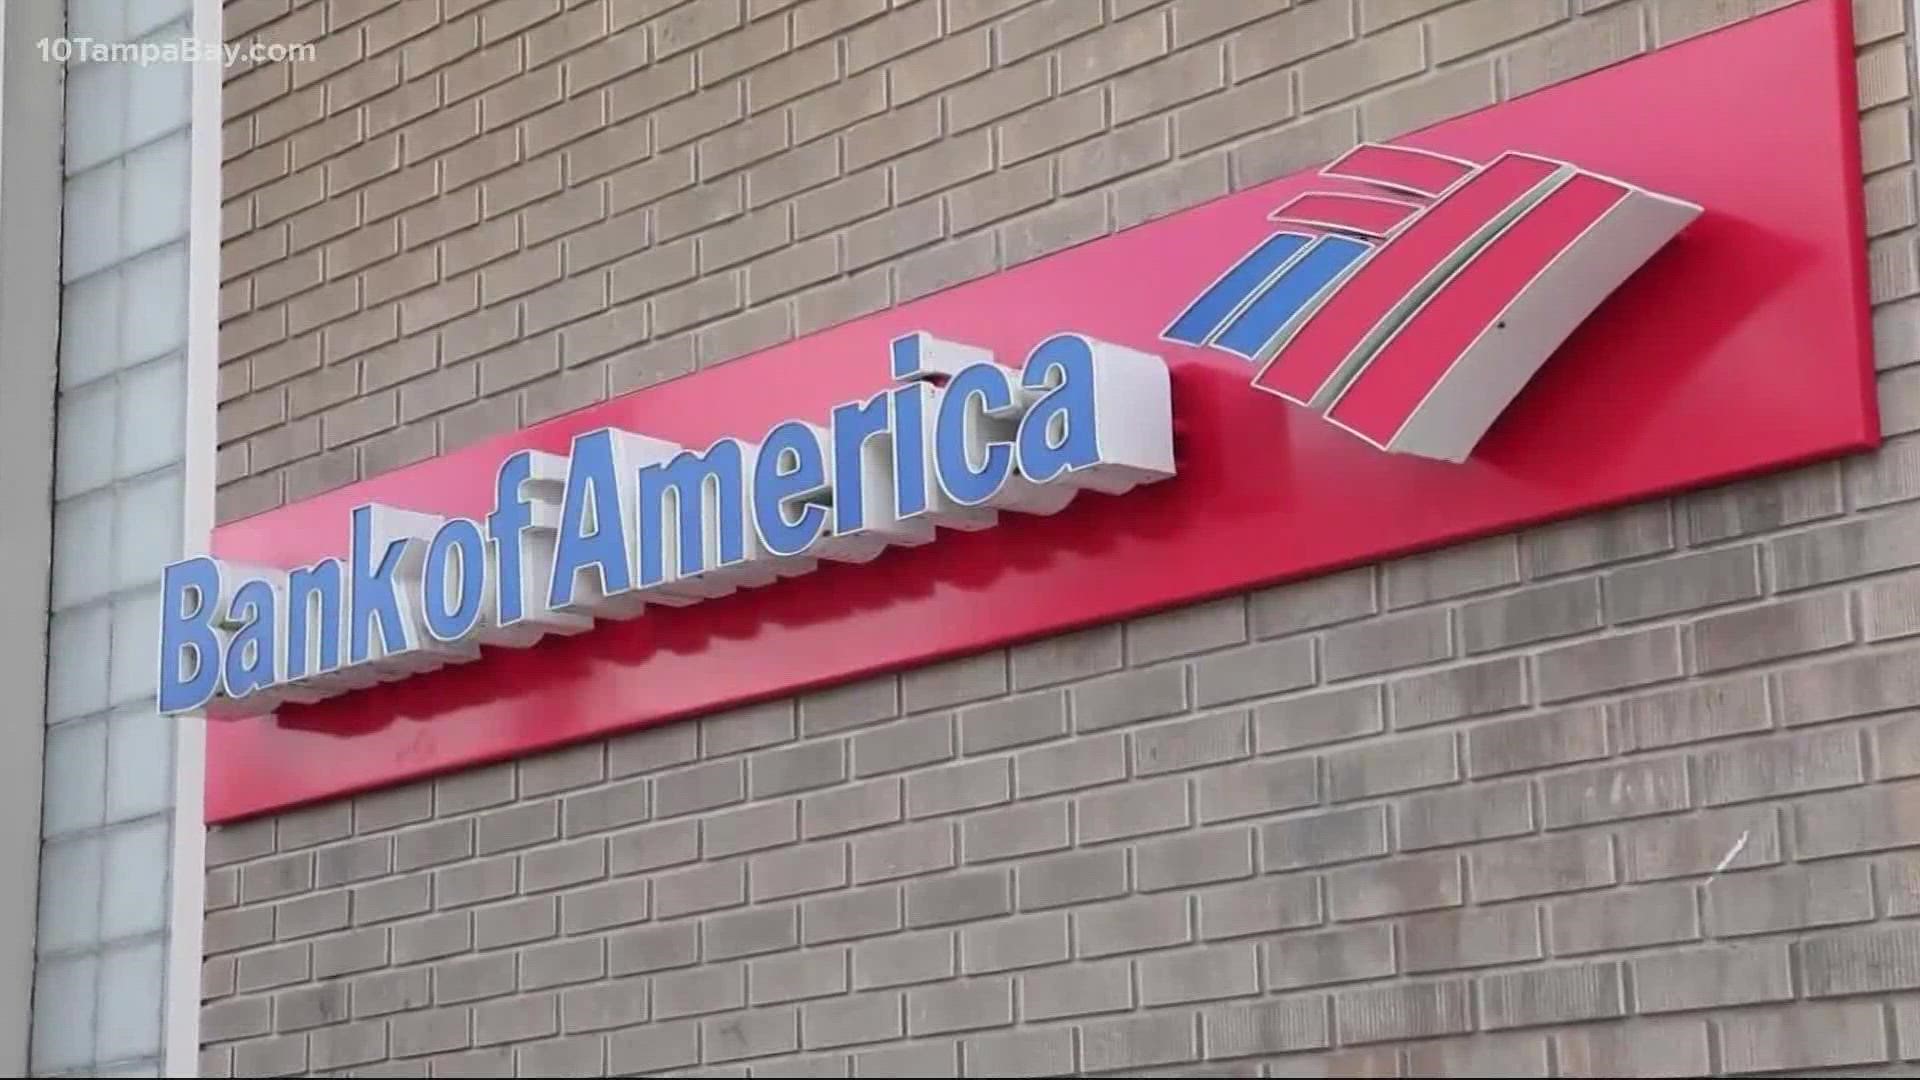 While Bank of America is one of the U.S.'s largest banks, it remains unclear if others will follow their lead in reducing overdraft fees